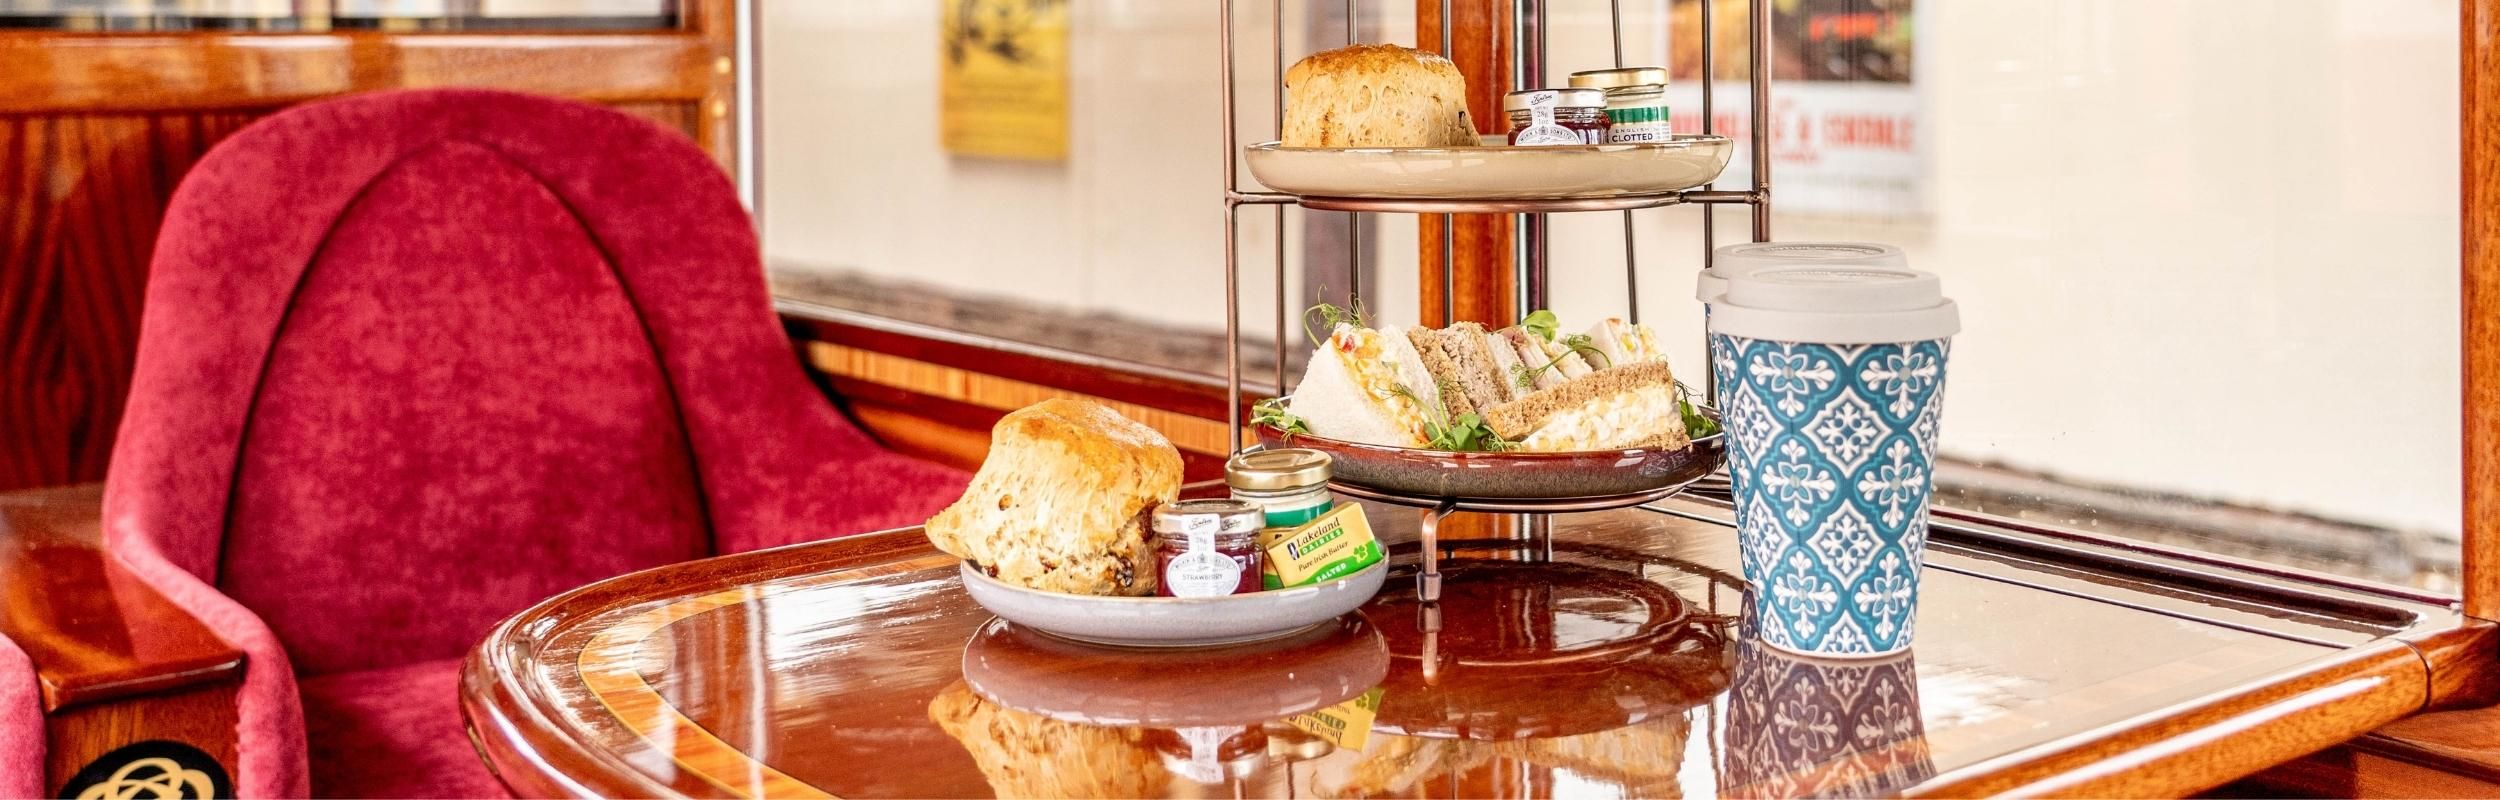 A cream tea on the move special gift experience at the Ravenglass and Eskdale railway